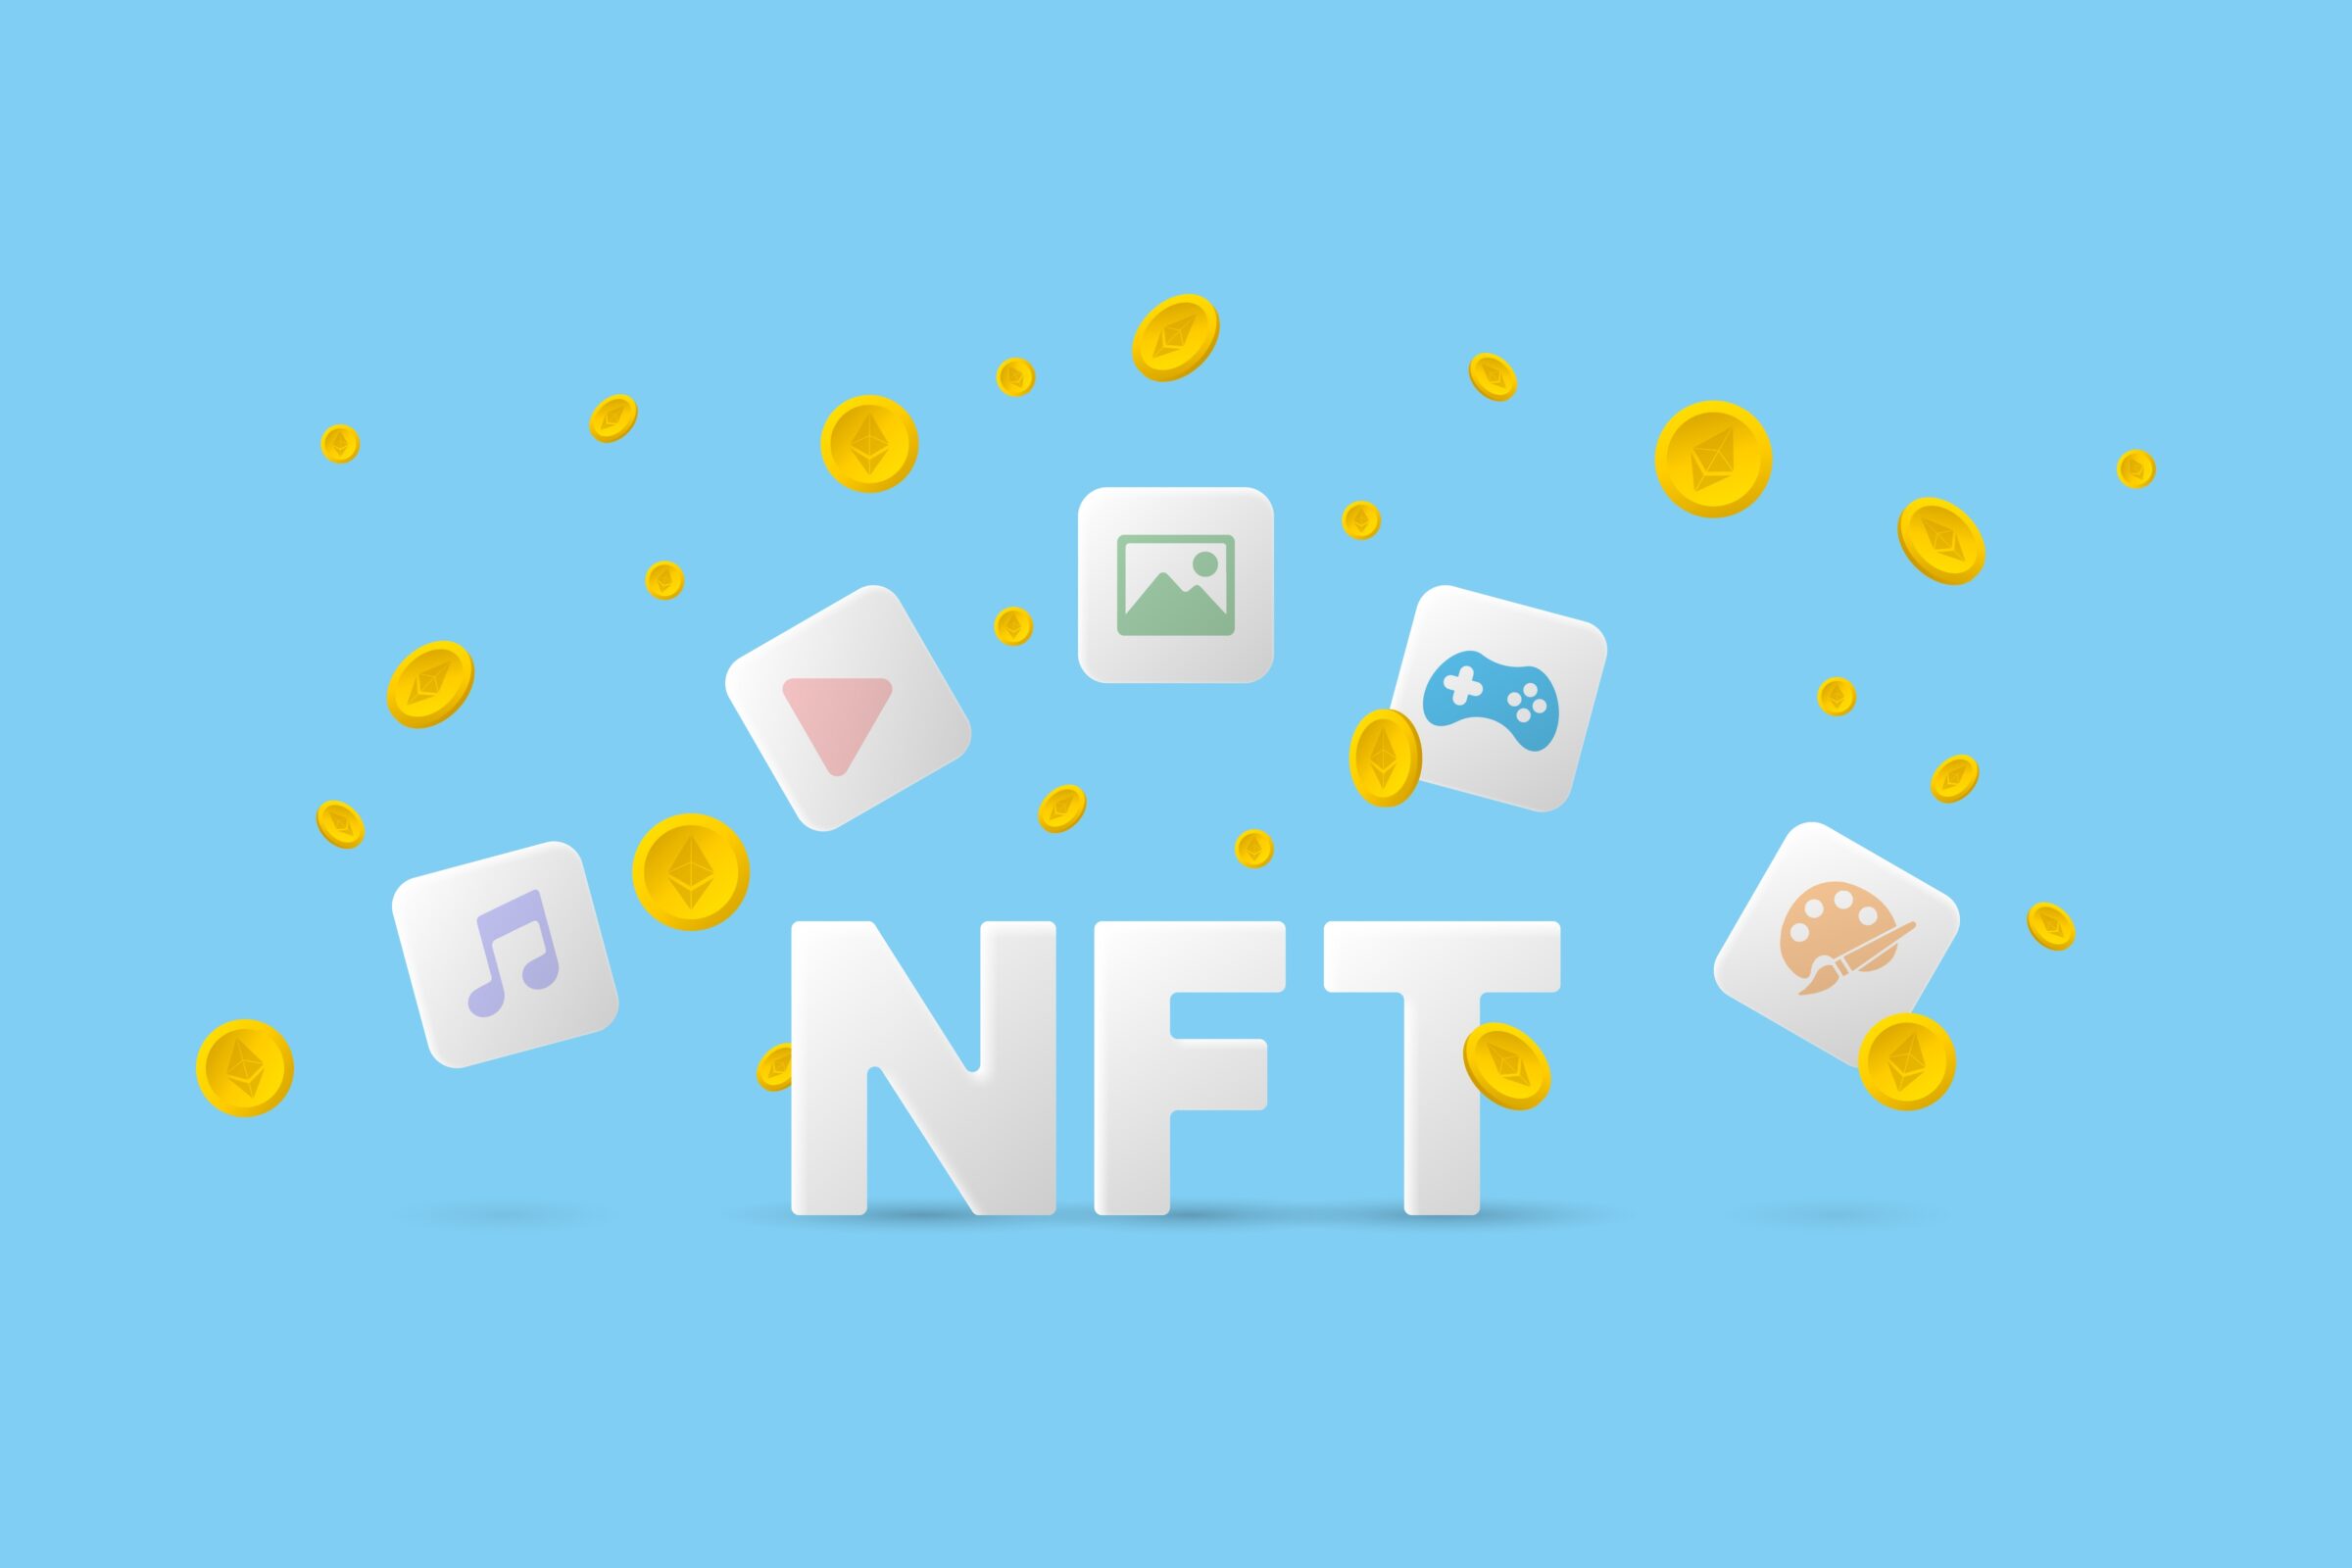 NFT (Non Fungible Token) concept in simple 3d illustration. Blue